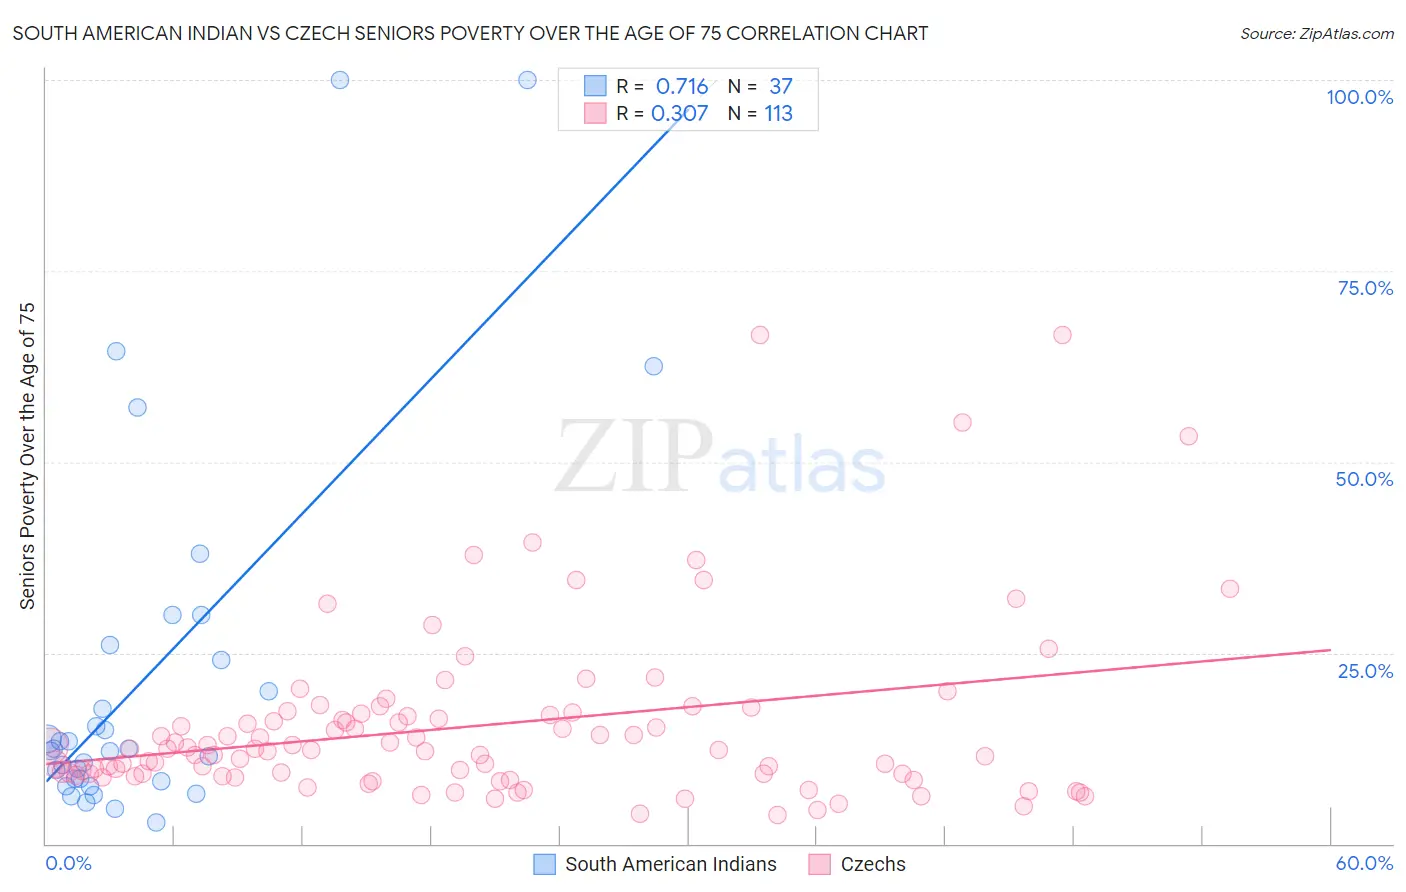 South American Indian vs Czech Seniors Poverty Over the Age of 75